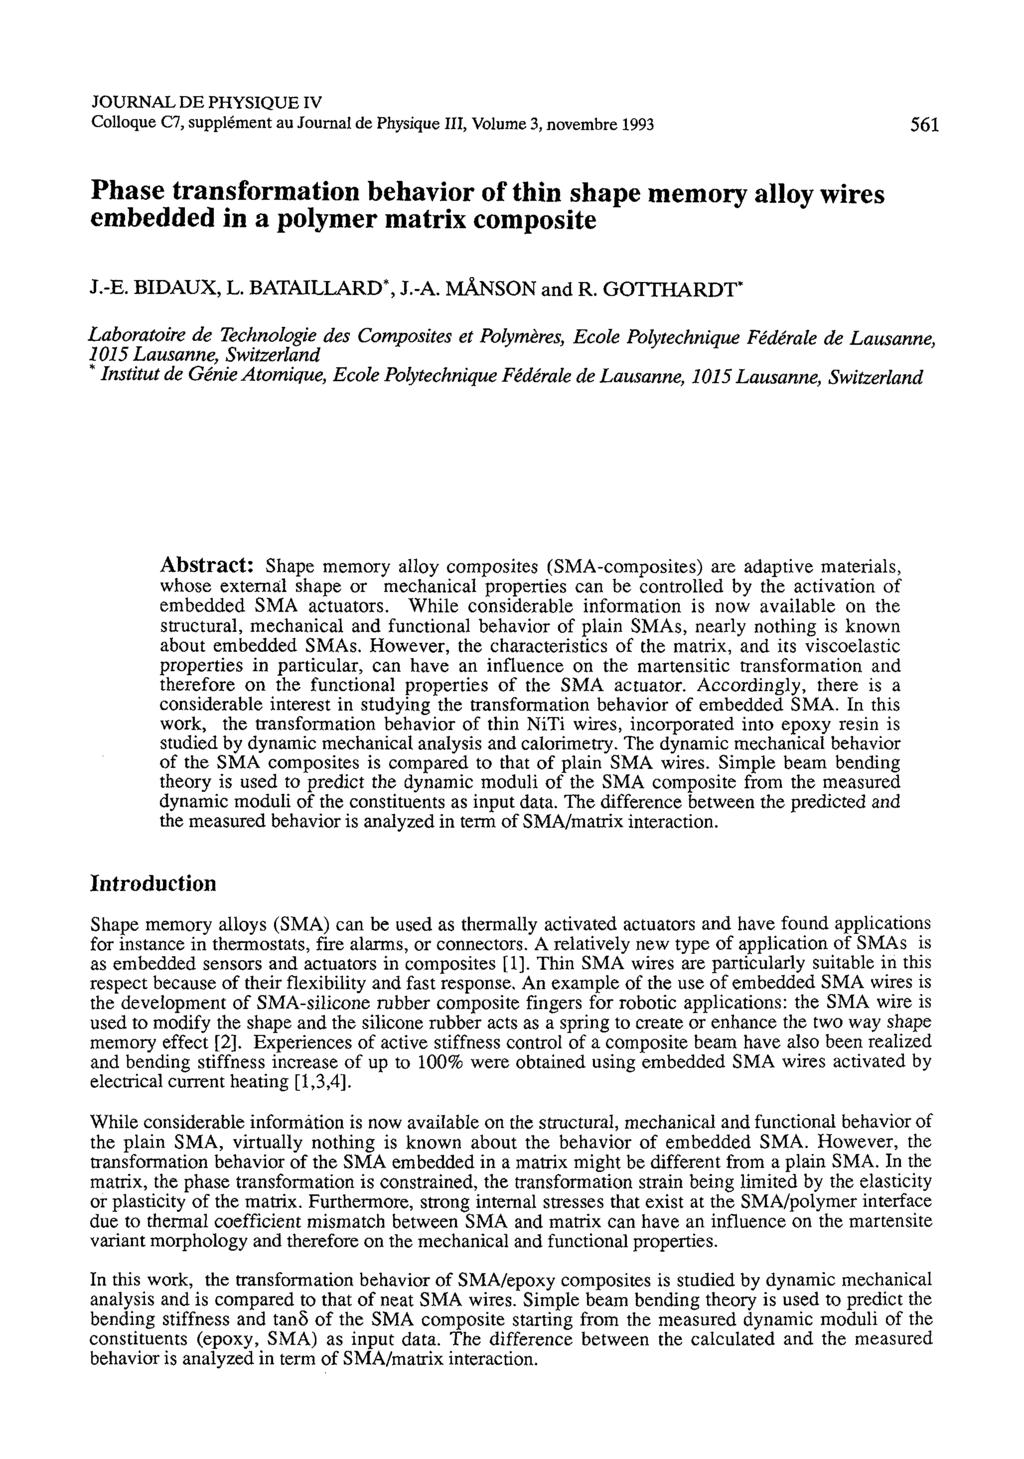 JOURNAL DE PHYSIQUE IV Colloque C7, suppl6ment au Journal de Physique 111, Volume 3, novembre 1993 Phase transformation behavior of thin shape memory alloy wires embedded in a polymer matrix